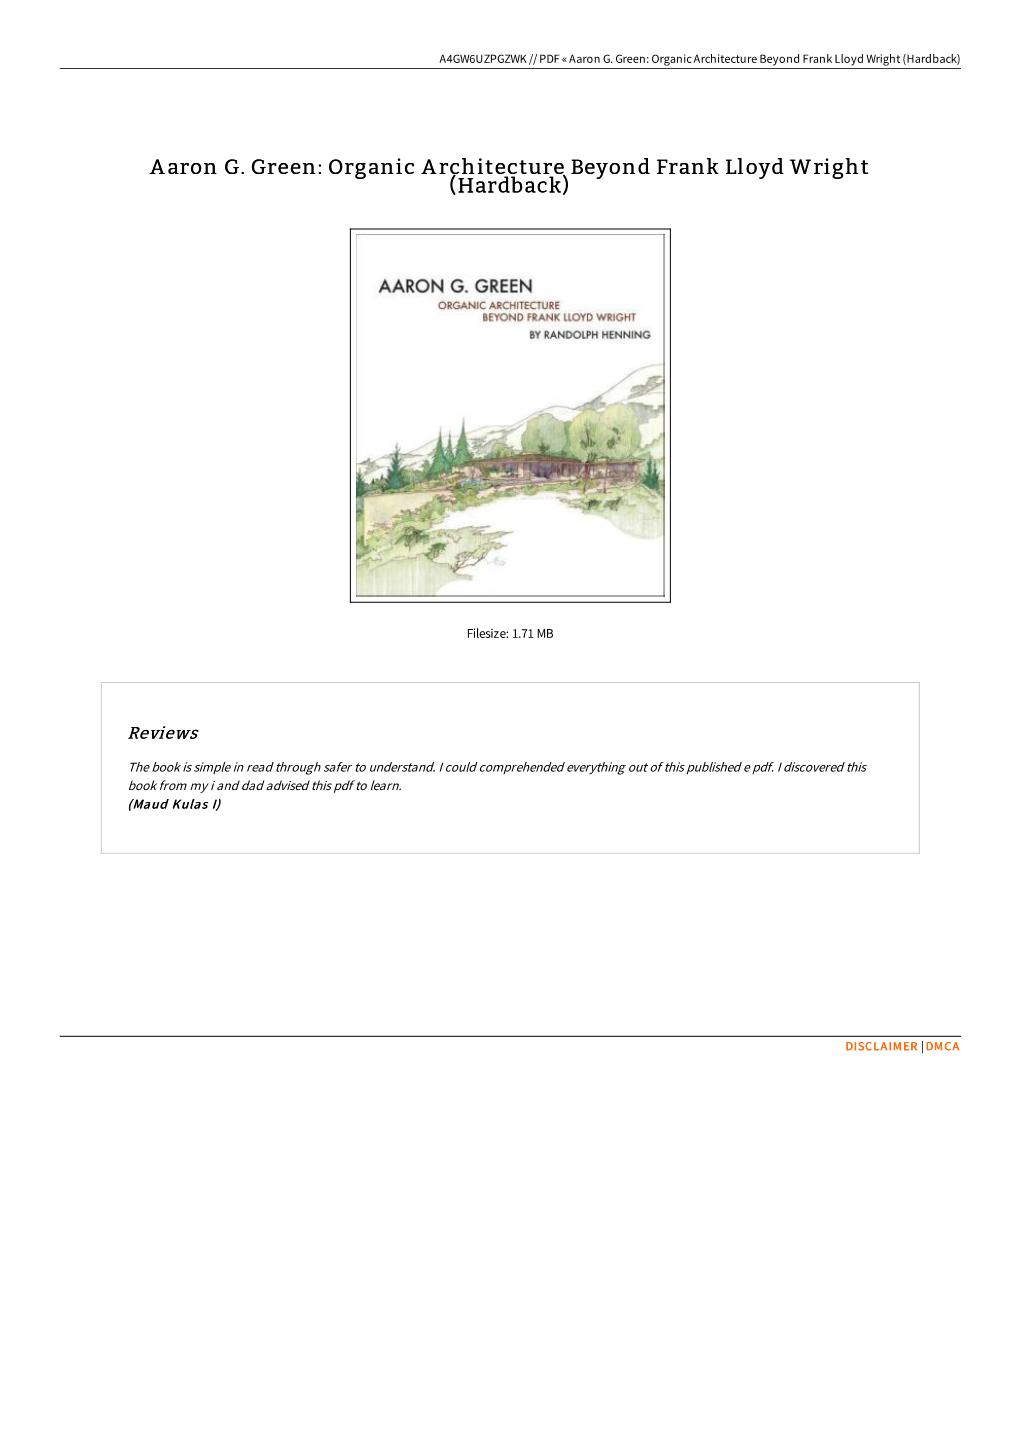 Find Book # Aaron G. Green: Organic Architecture Beyond Frank